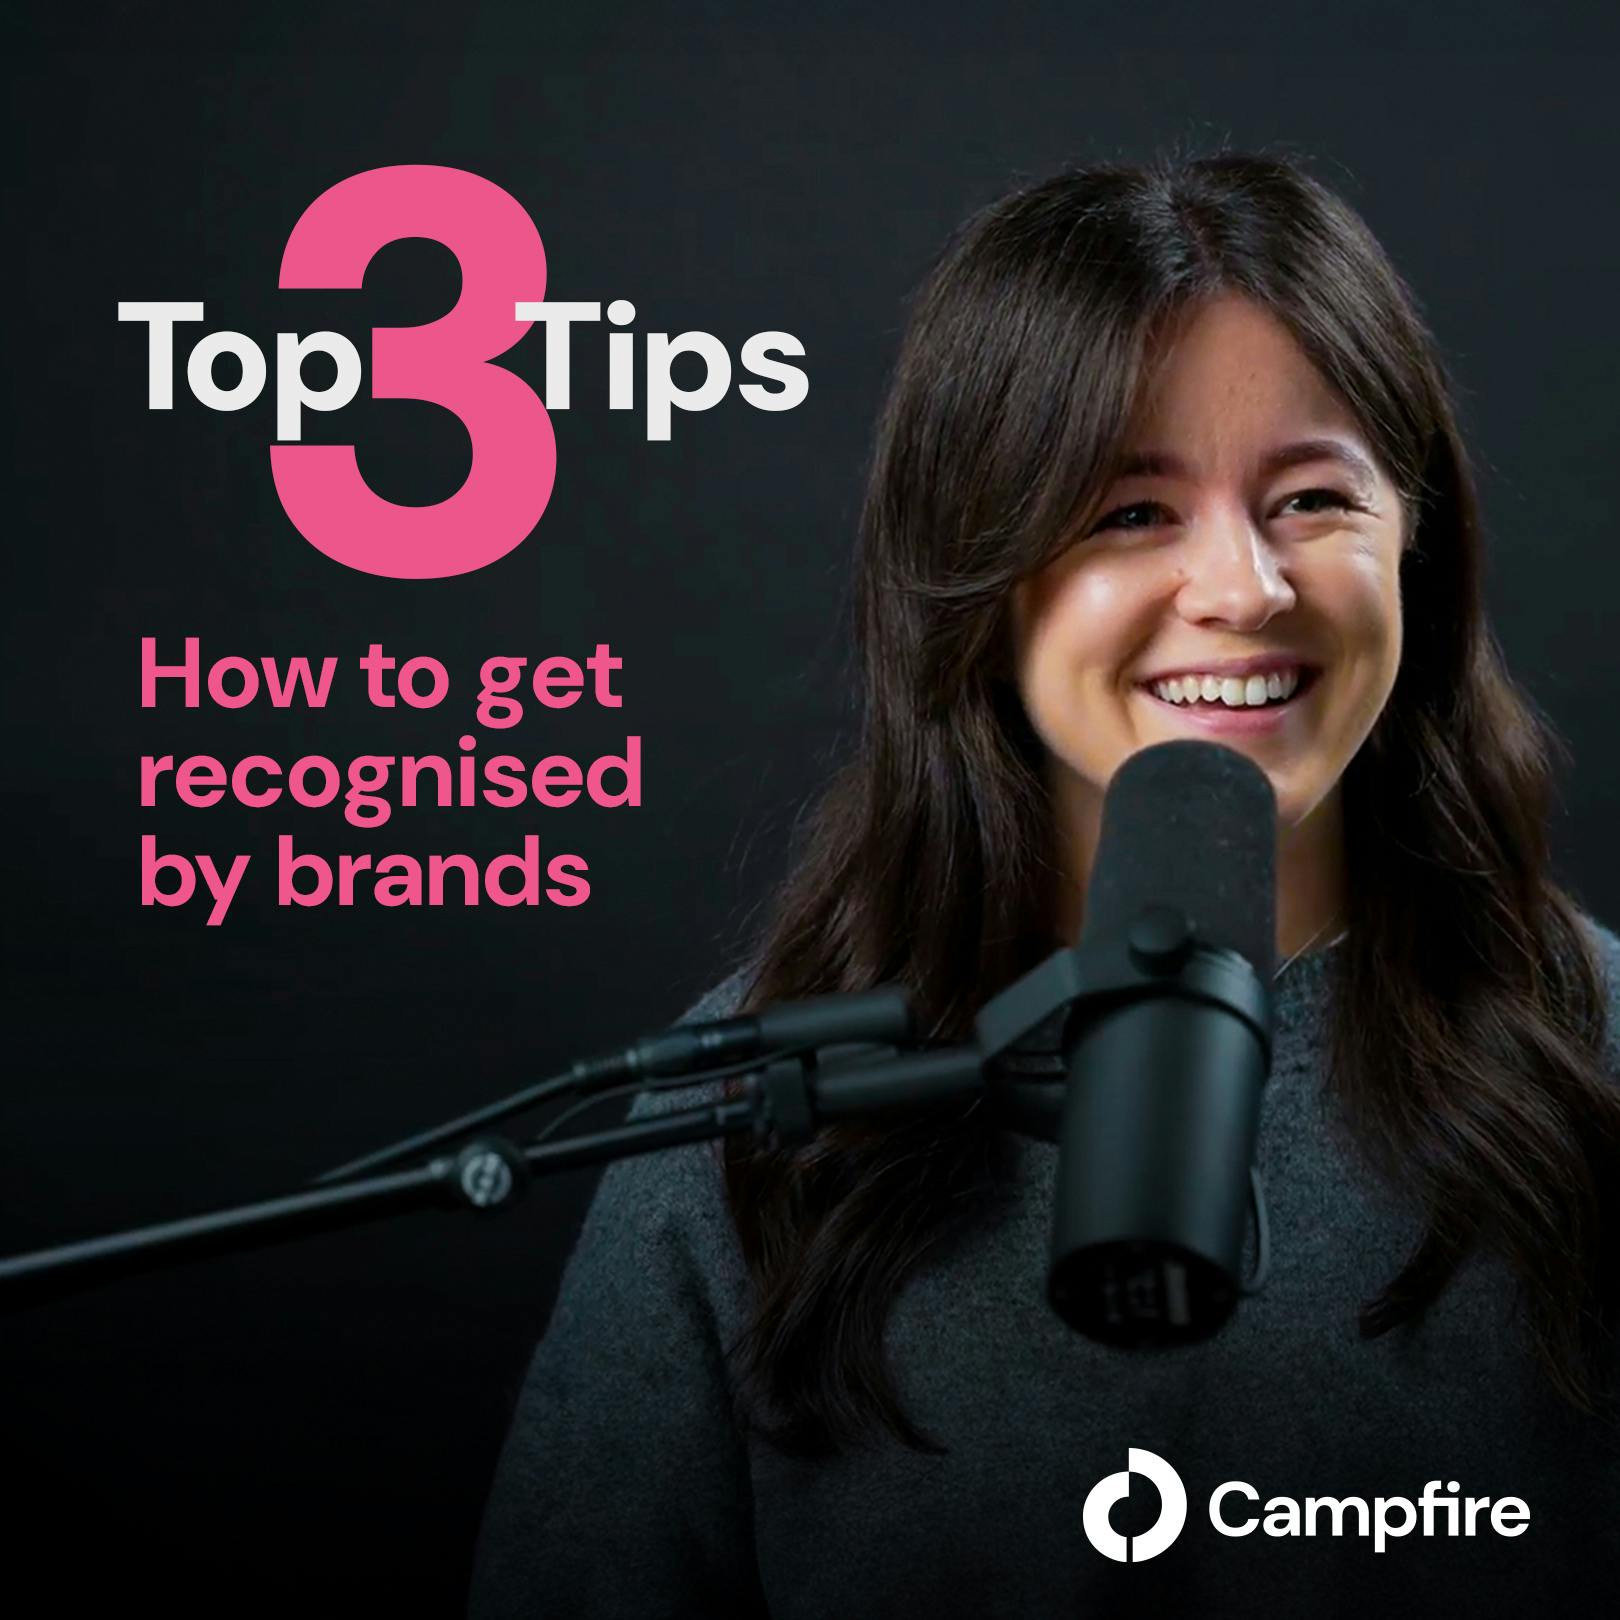 Top 3 Tips on How To Get Recognised By Brands